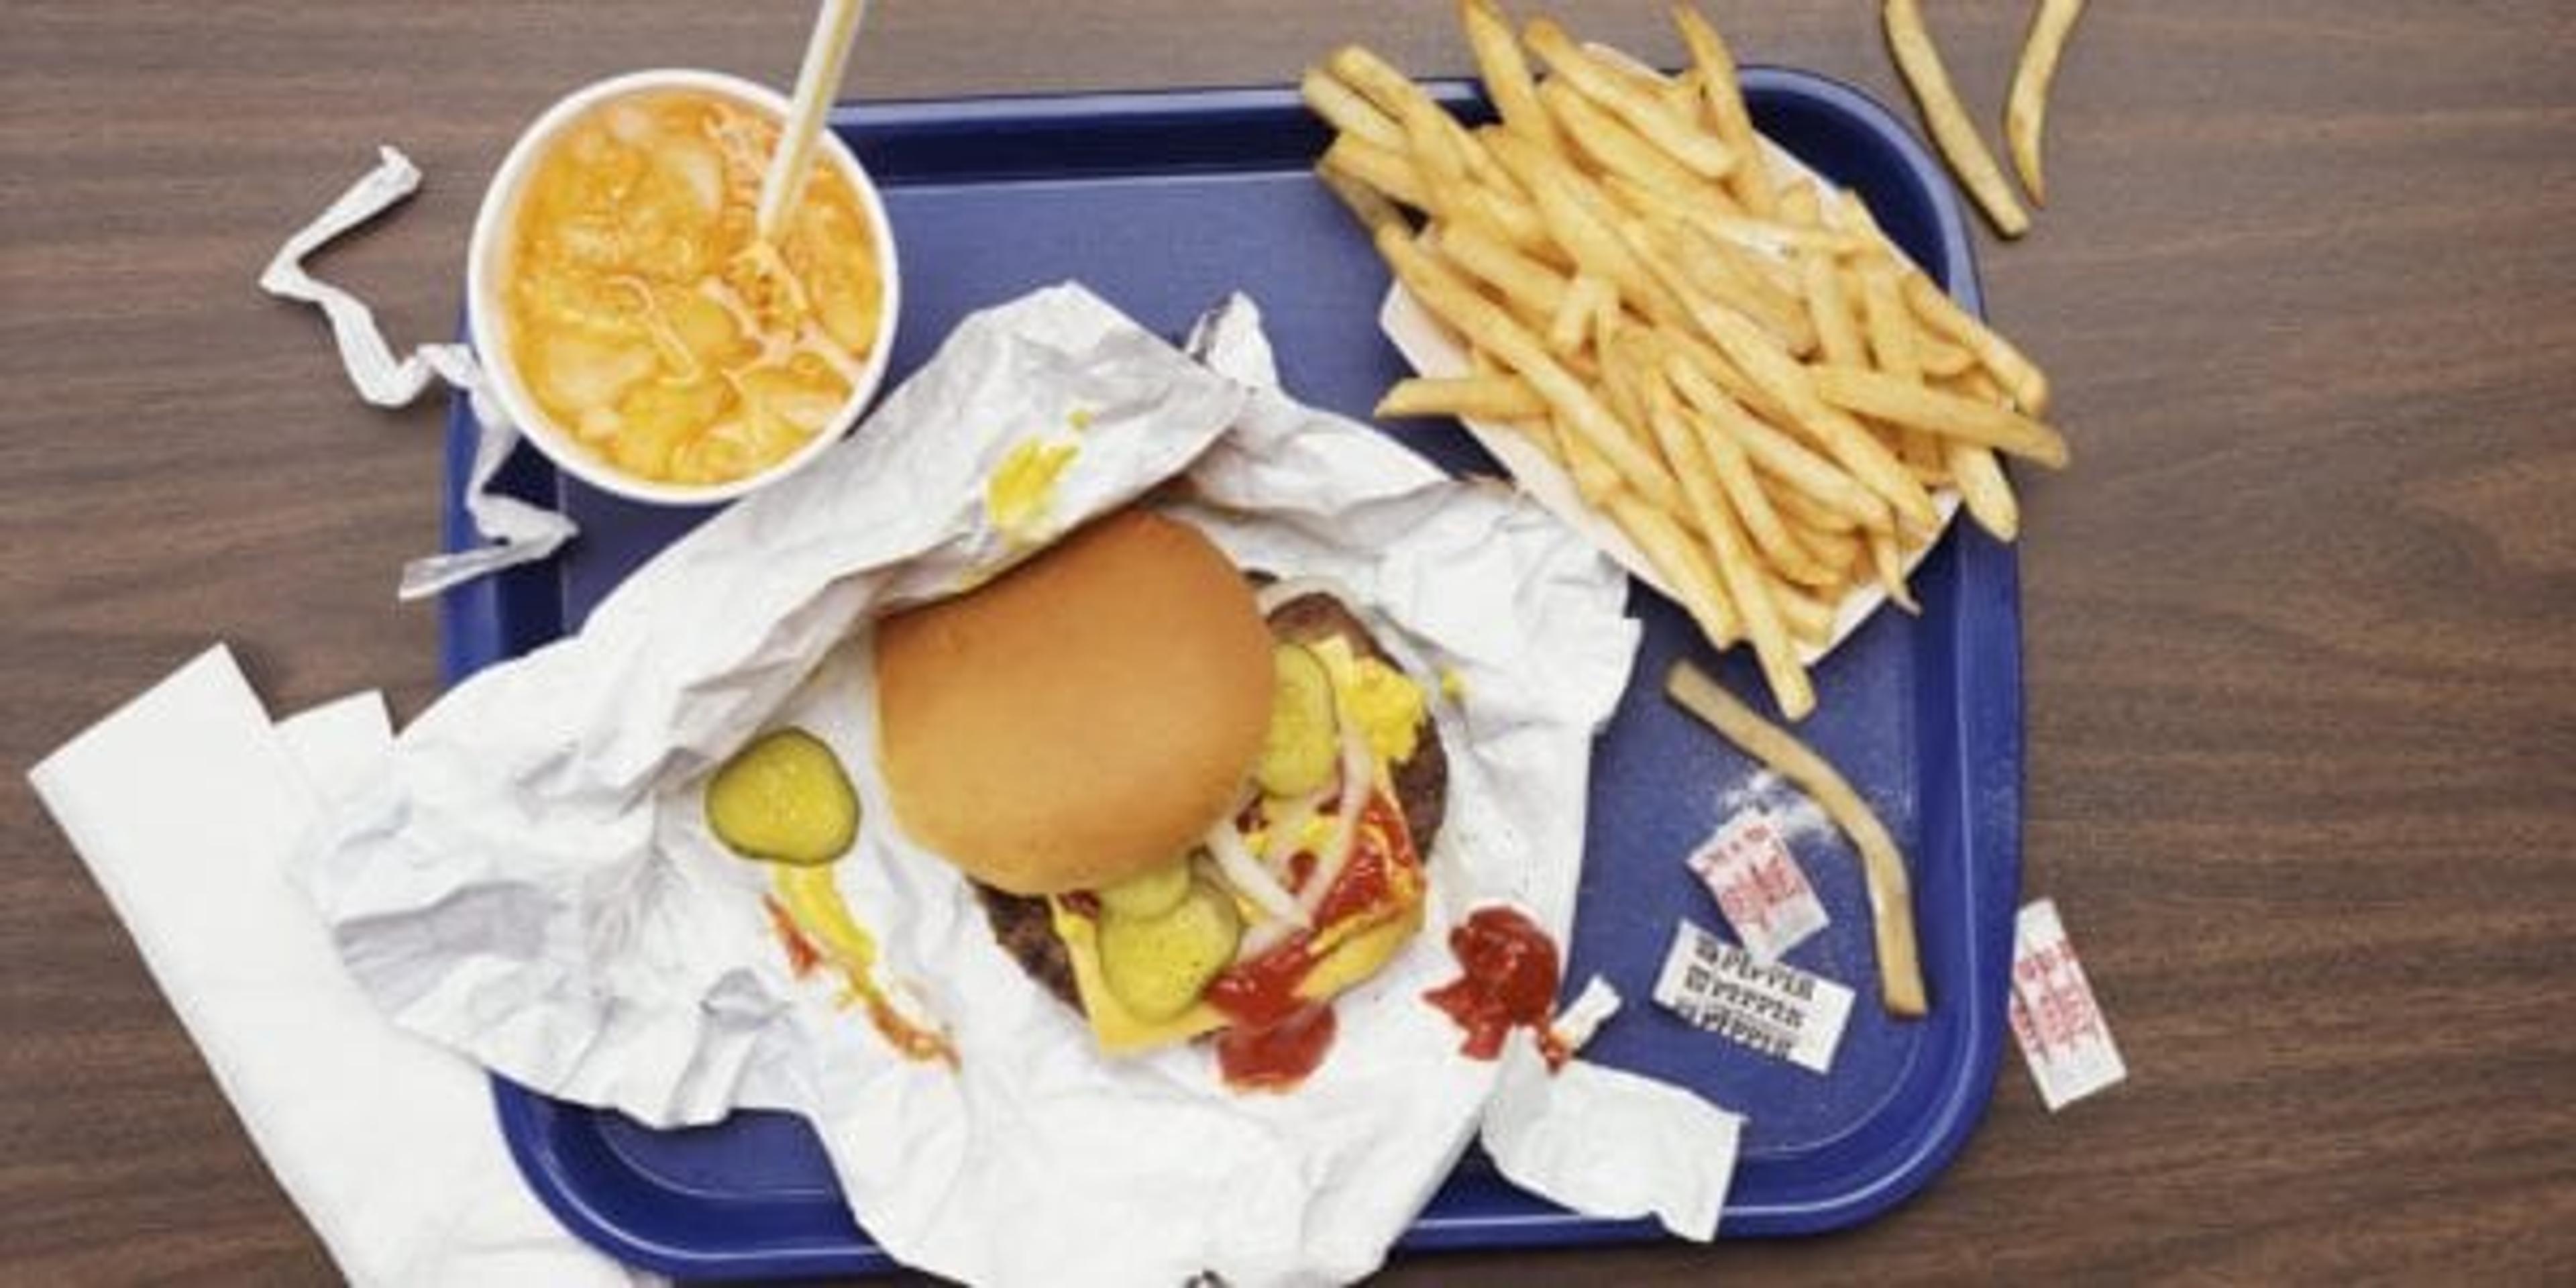 Burgers, french fries, soda on a cafeteria tray